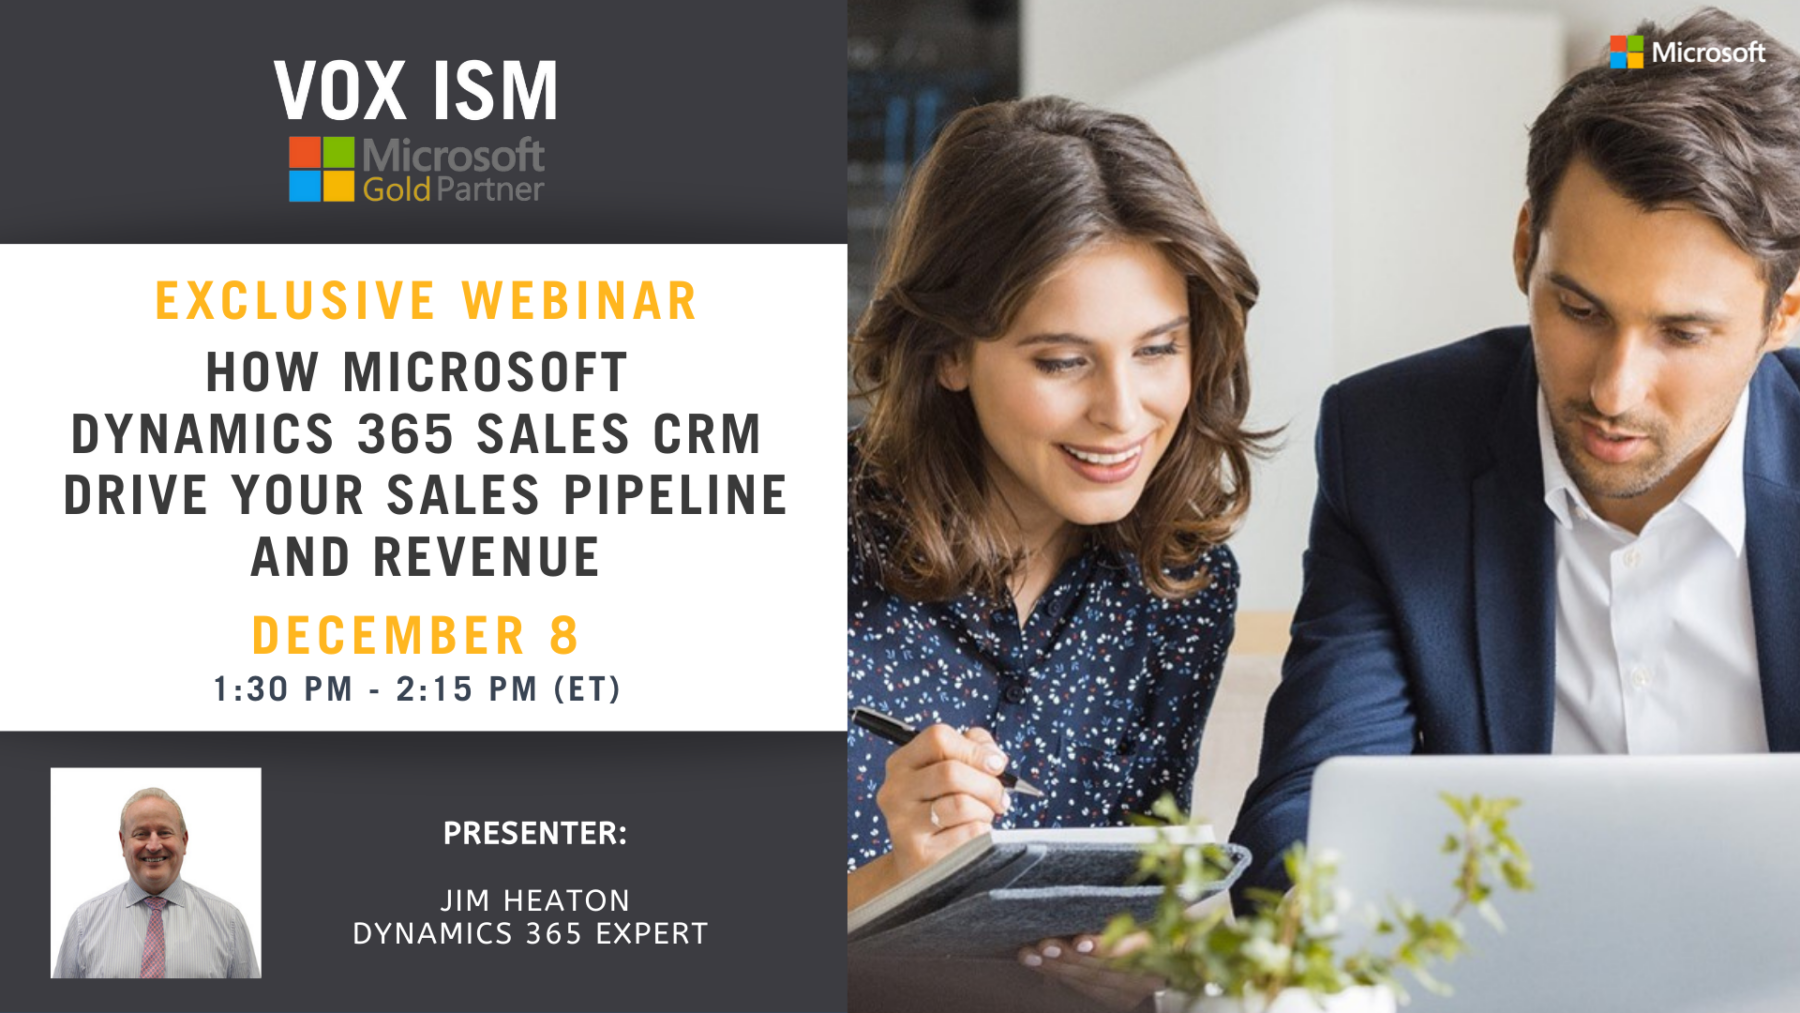 How Microsoft Dynamics 365 Sales CRM Drive Your Sales Pipeline and Revenue